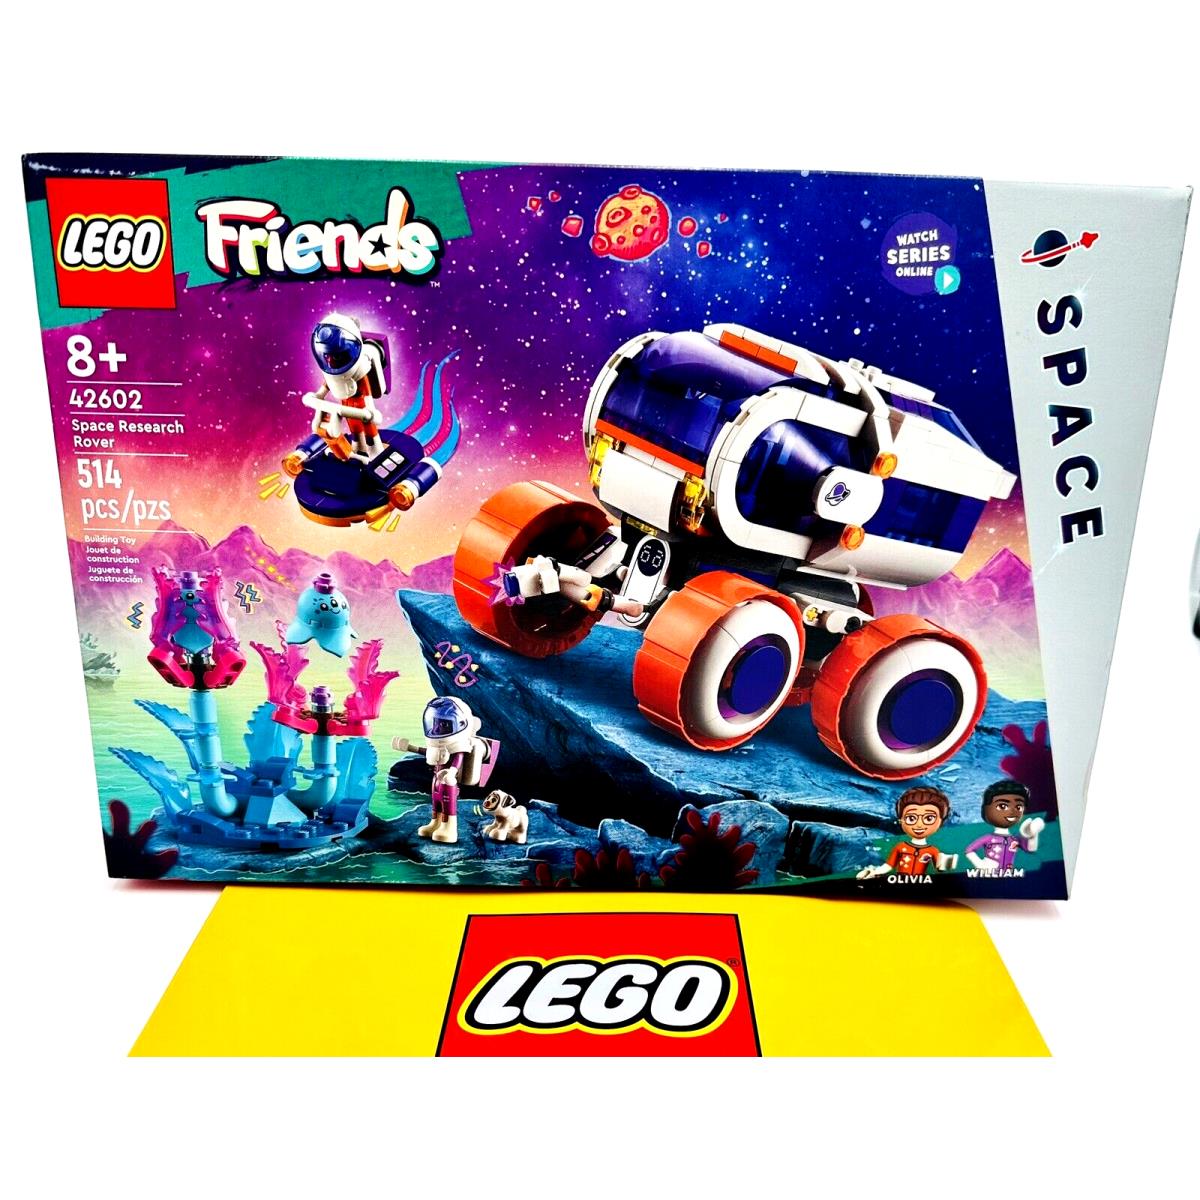 Lego Friends 42602 Space Research Rover